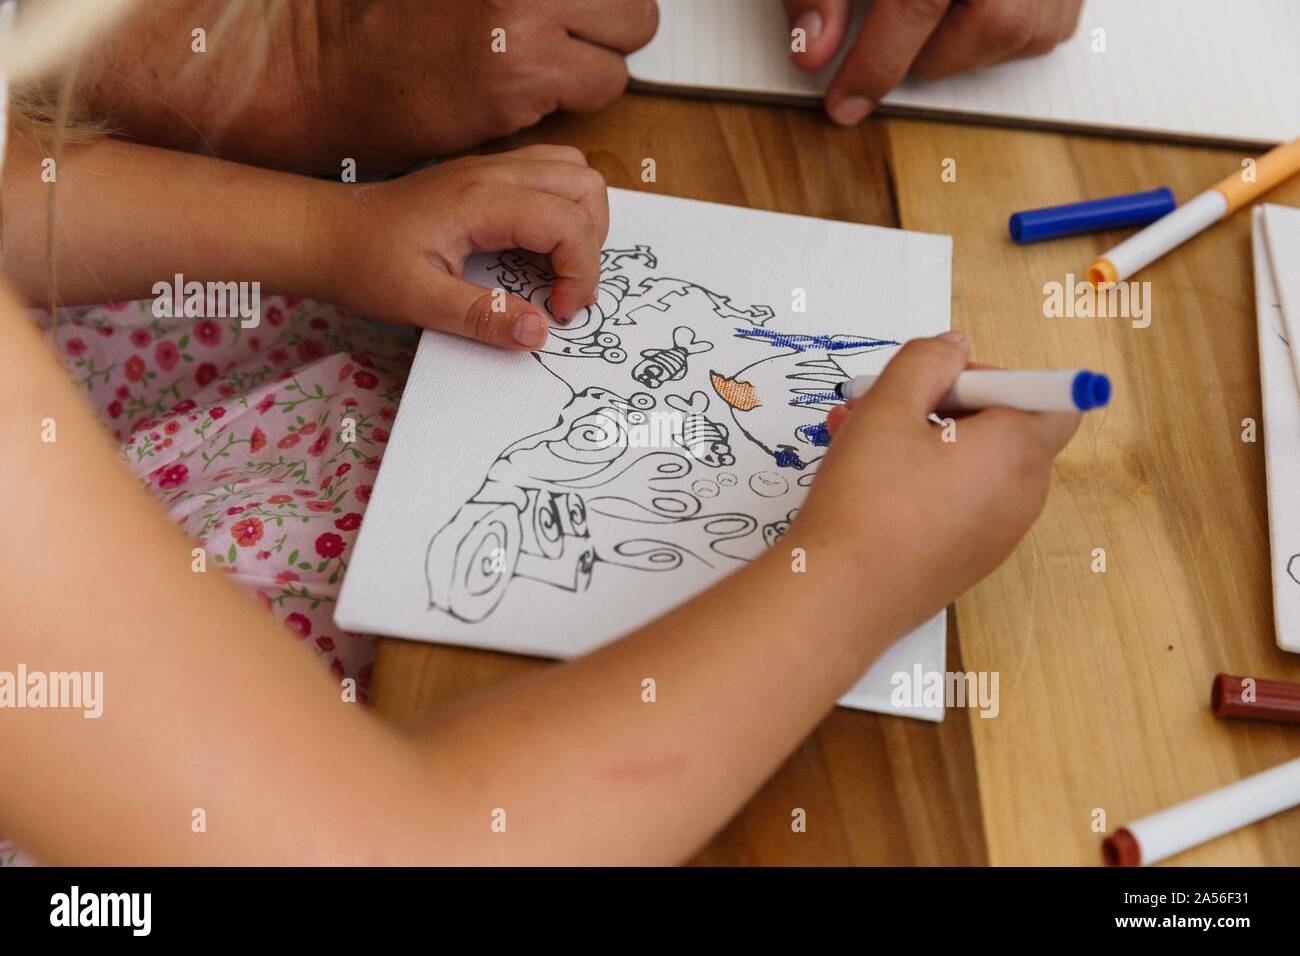 Child colouring a picture on a table Stock Photo